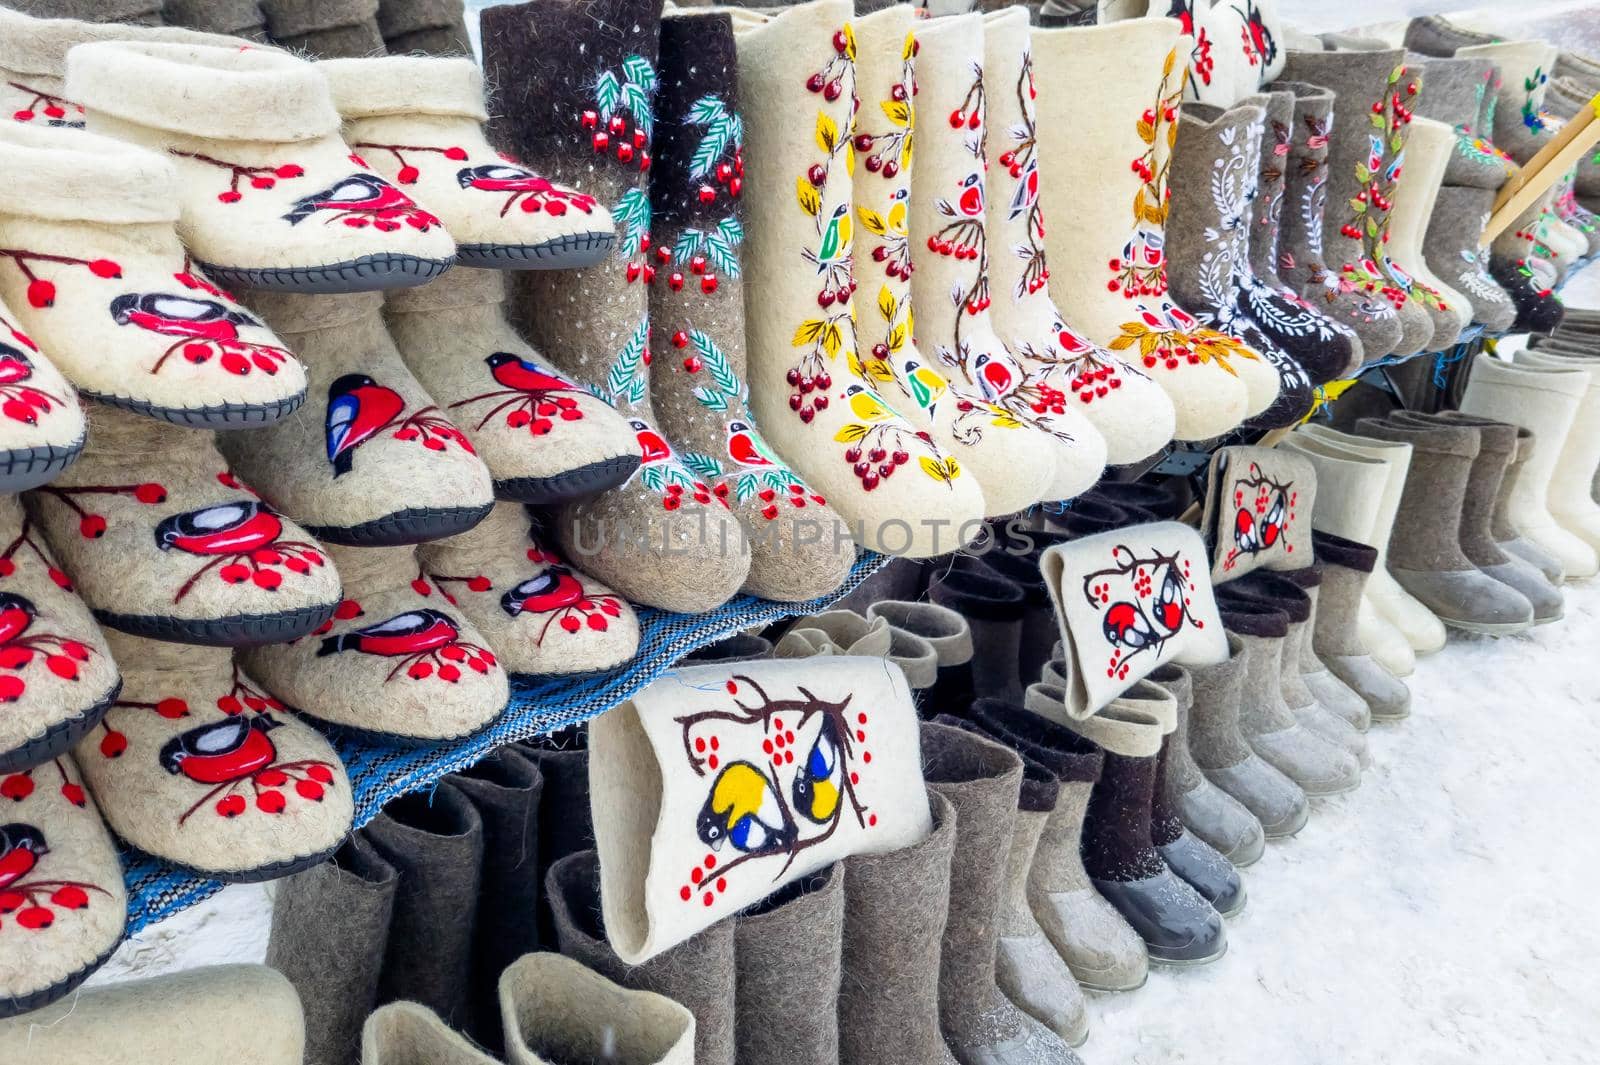 Valenki - traditional Russian winter shoes made of felt by Milanchikov